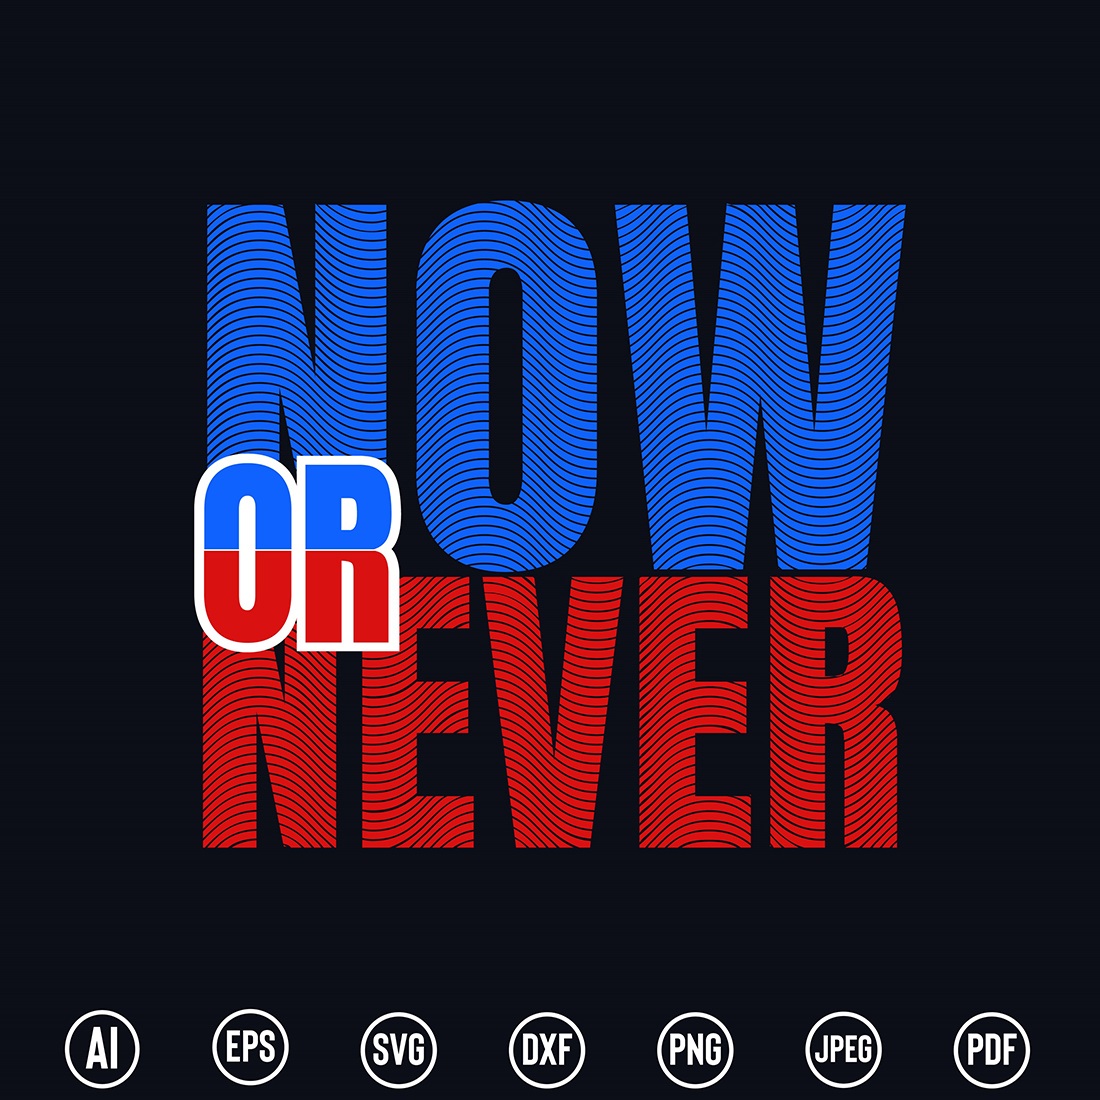 Modern and Inspirational T-Shirt design with “Now or Never” quote for t-shirt, posters, stickers, mug prints, banners, gift cards, labels etc preview image.